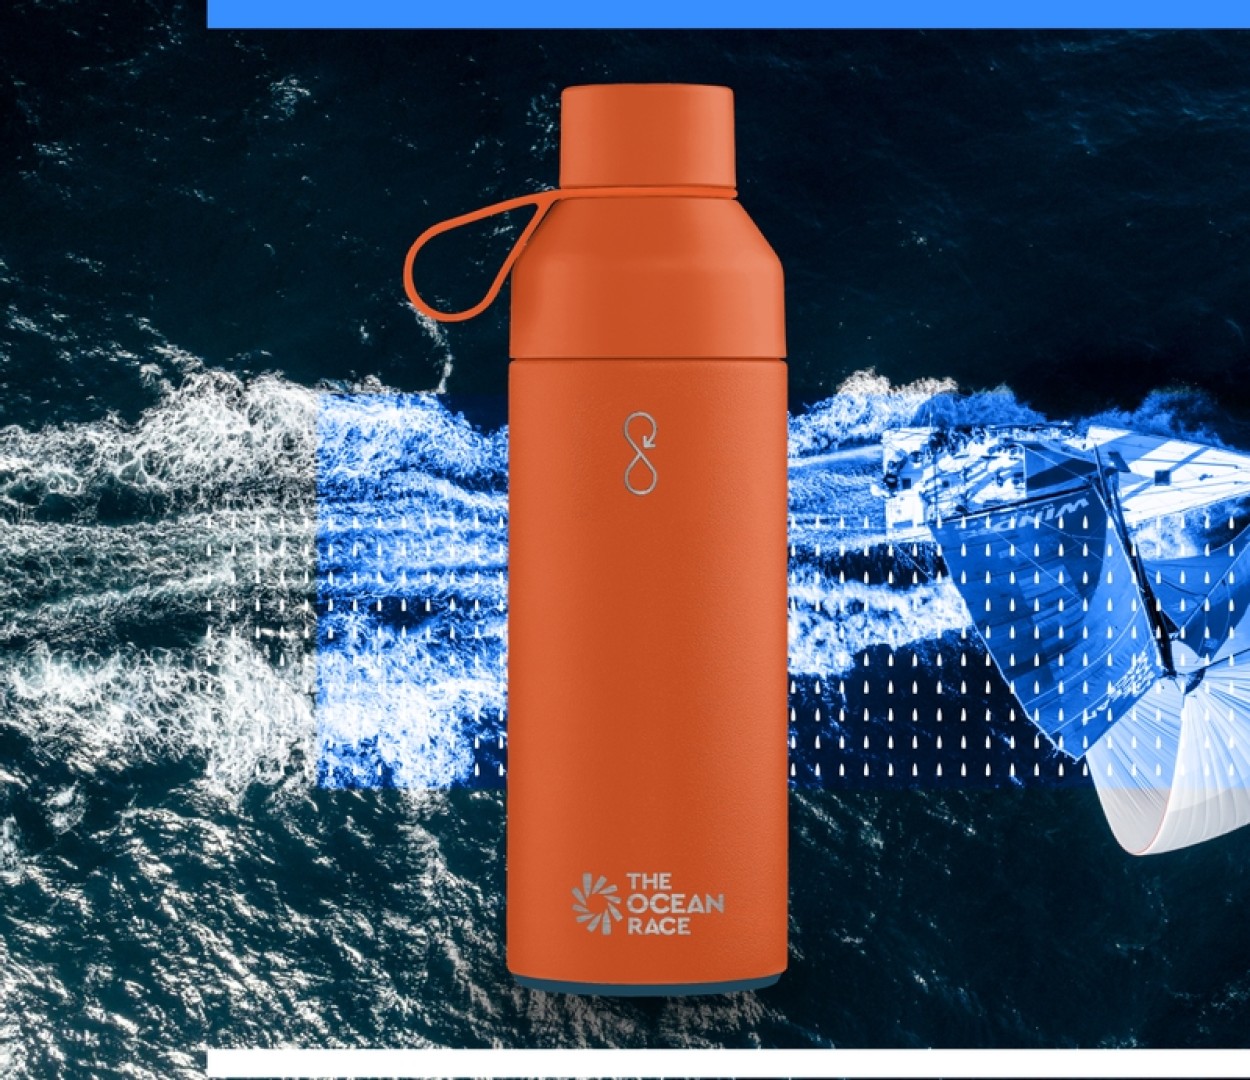 The special-edition bottle to commemorate The Ocean Race 2022-23
© The Ocean Race